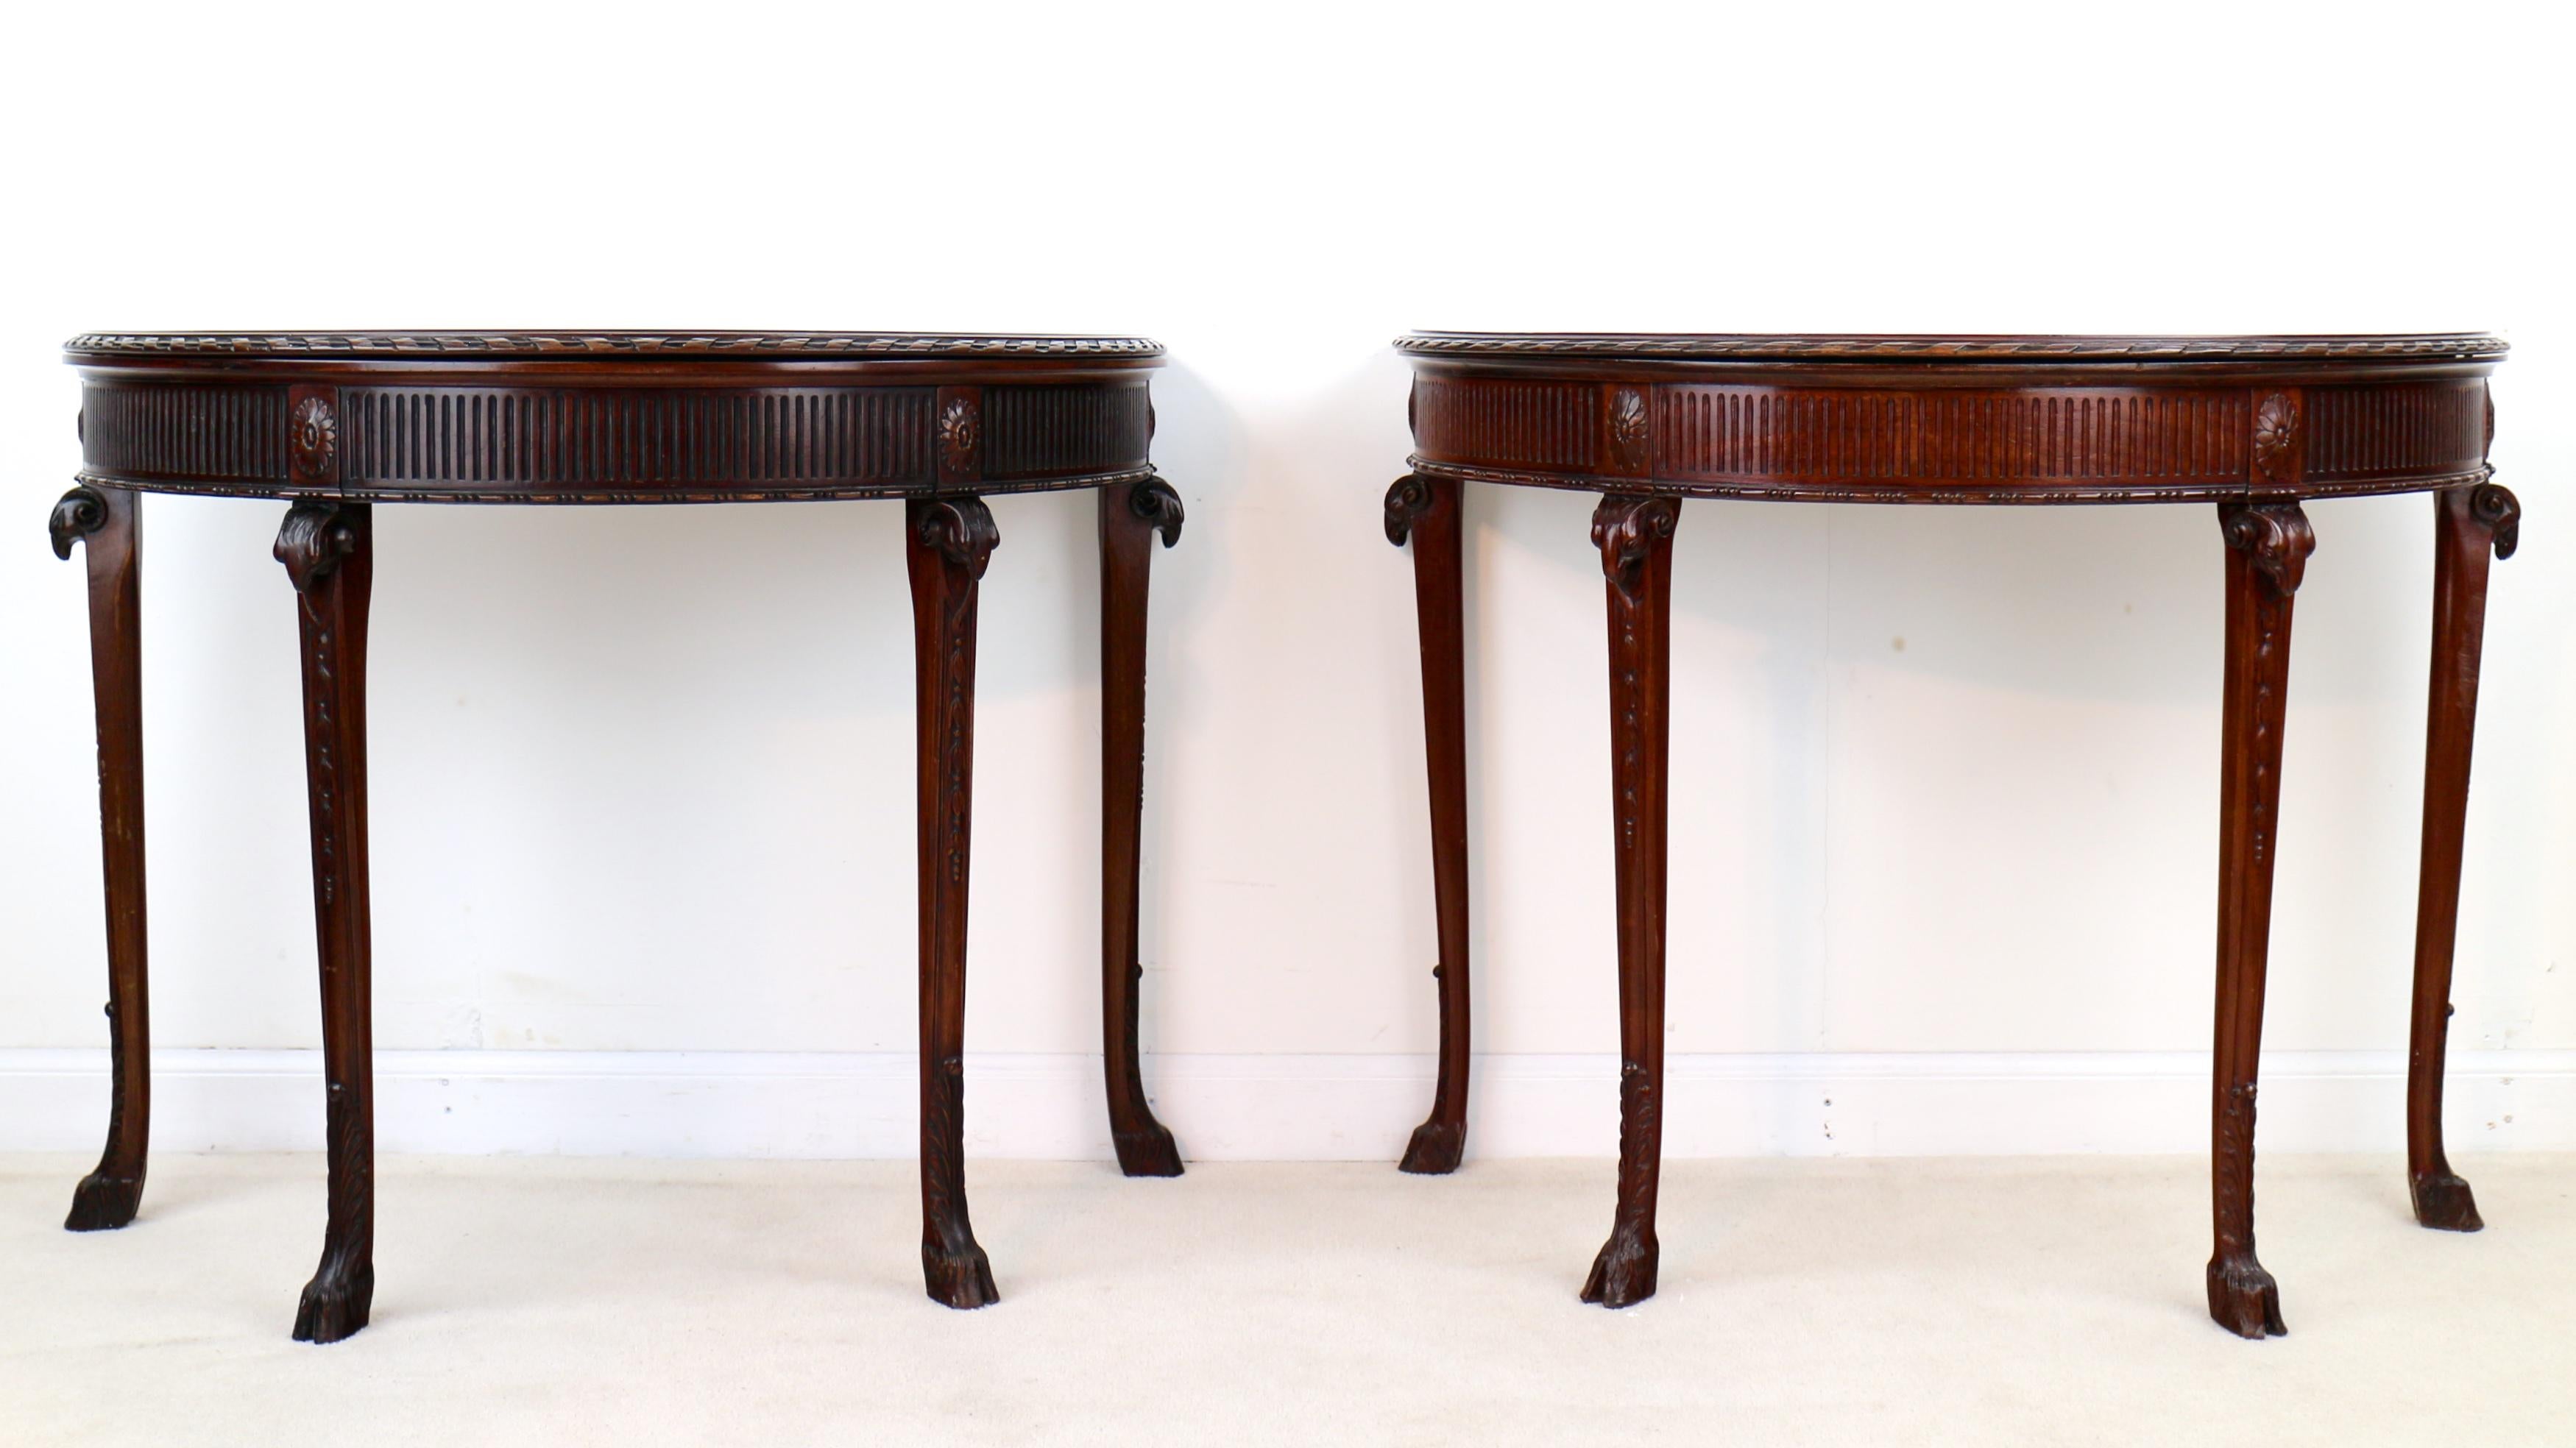 An elegant pair of George III style mahogany demo-lune card tables by Maples & Co and dating to circa 1900. These unusual tables are designed after the Neoclassical style of Robert Adam and Thomas Chippendale as found in Paxton House in Scotland.